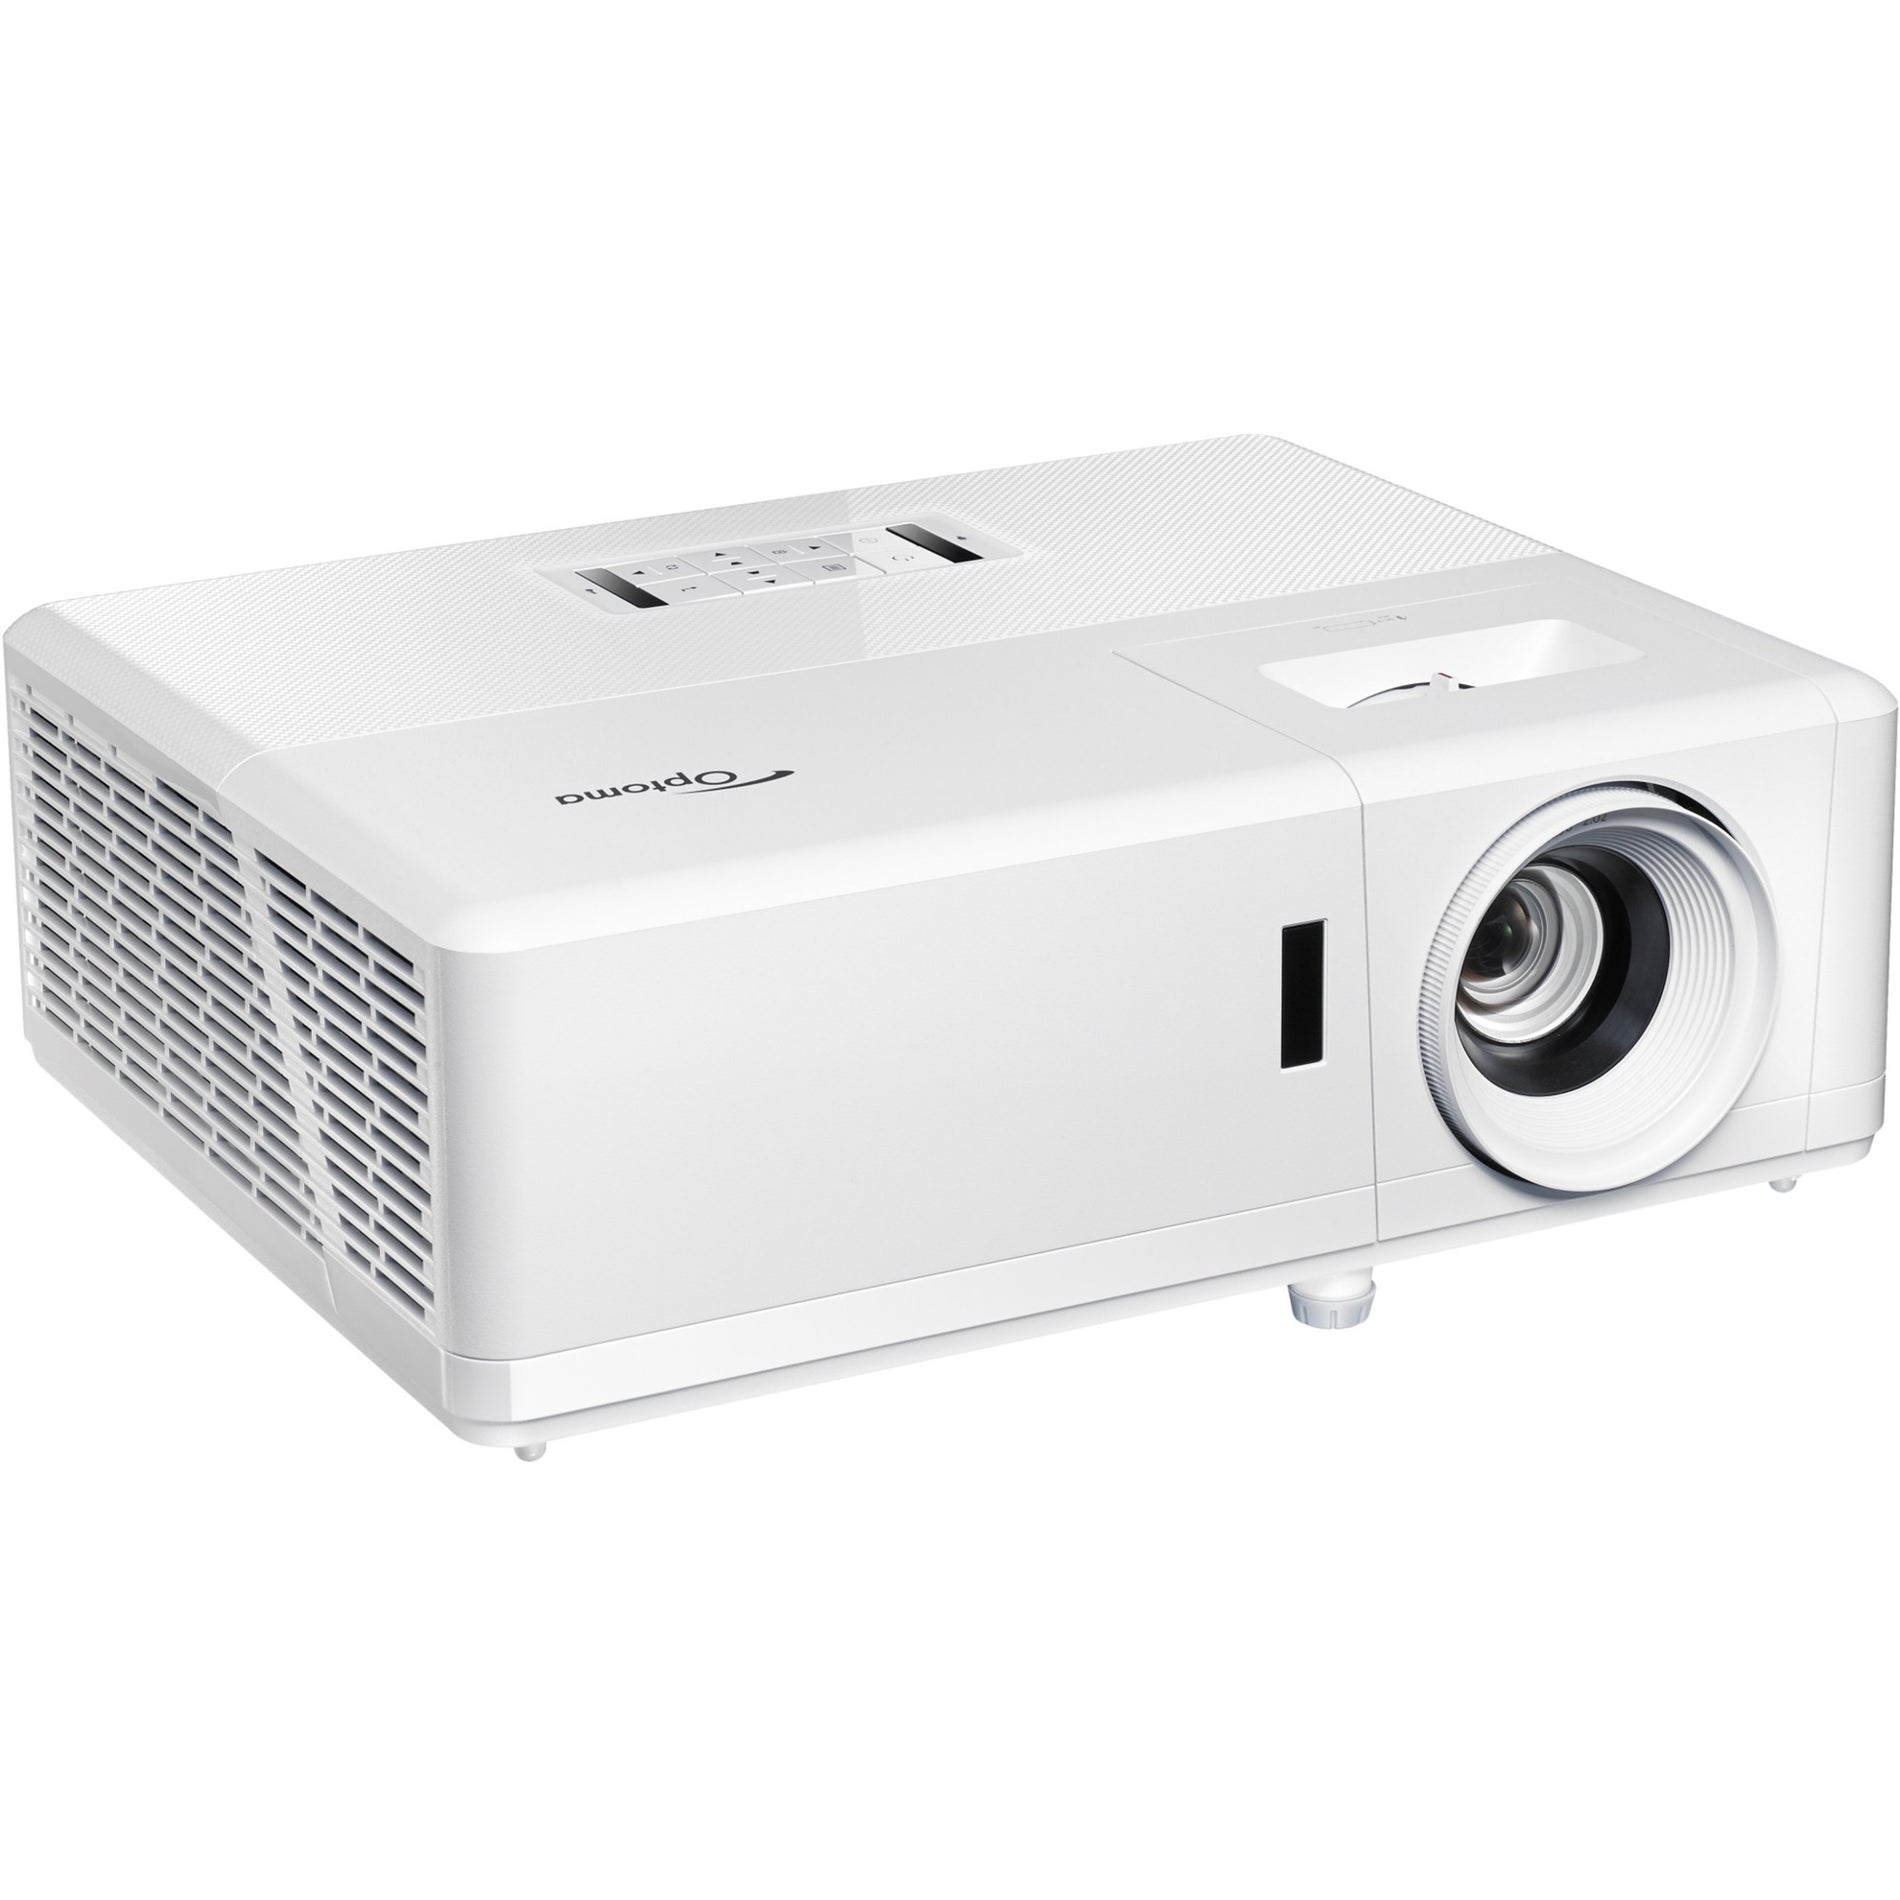 Optoma ZK400 DuraCore 4K UHD Laser Projector, 4000 Lumens, 2,000,000:1 Contrast Ratio, HLG HDR